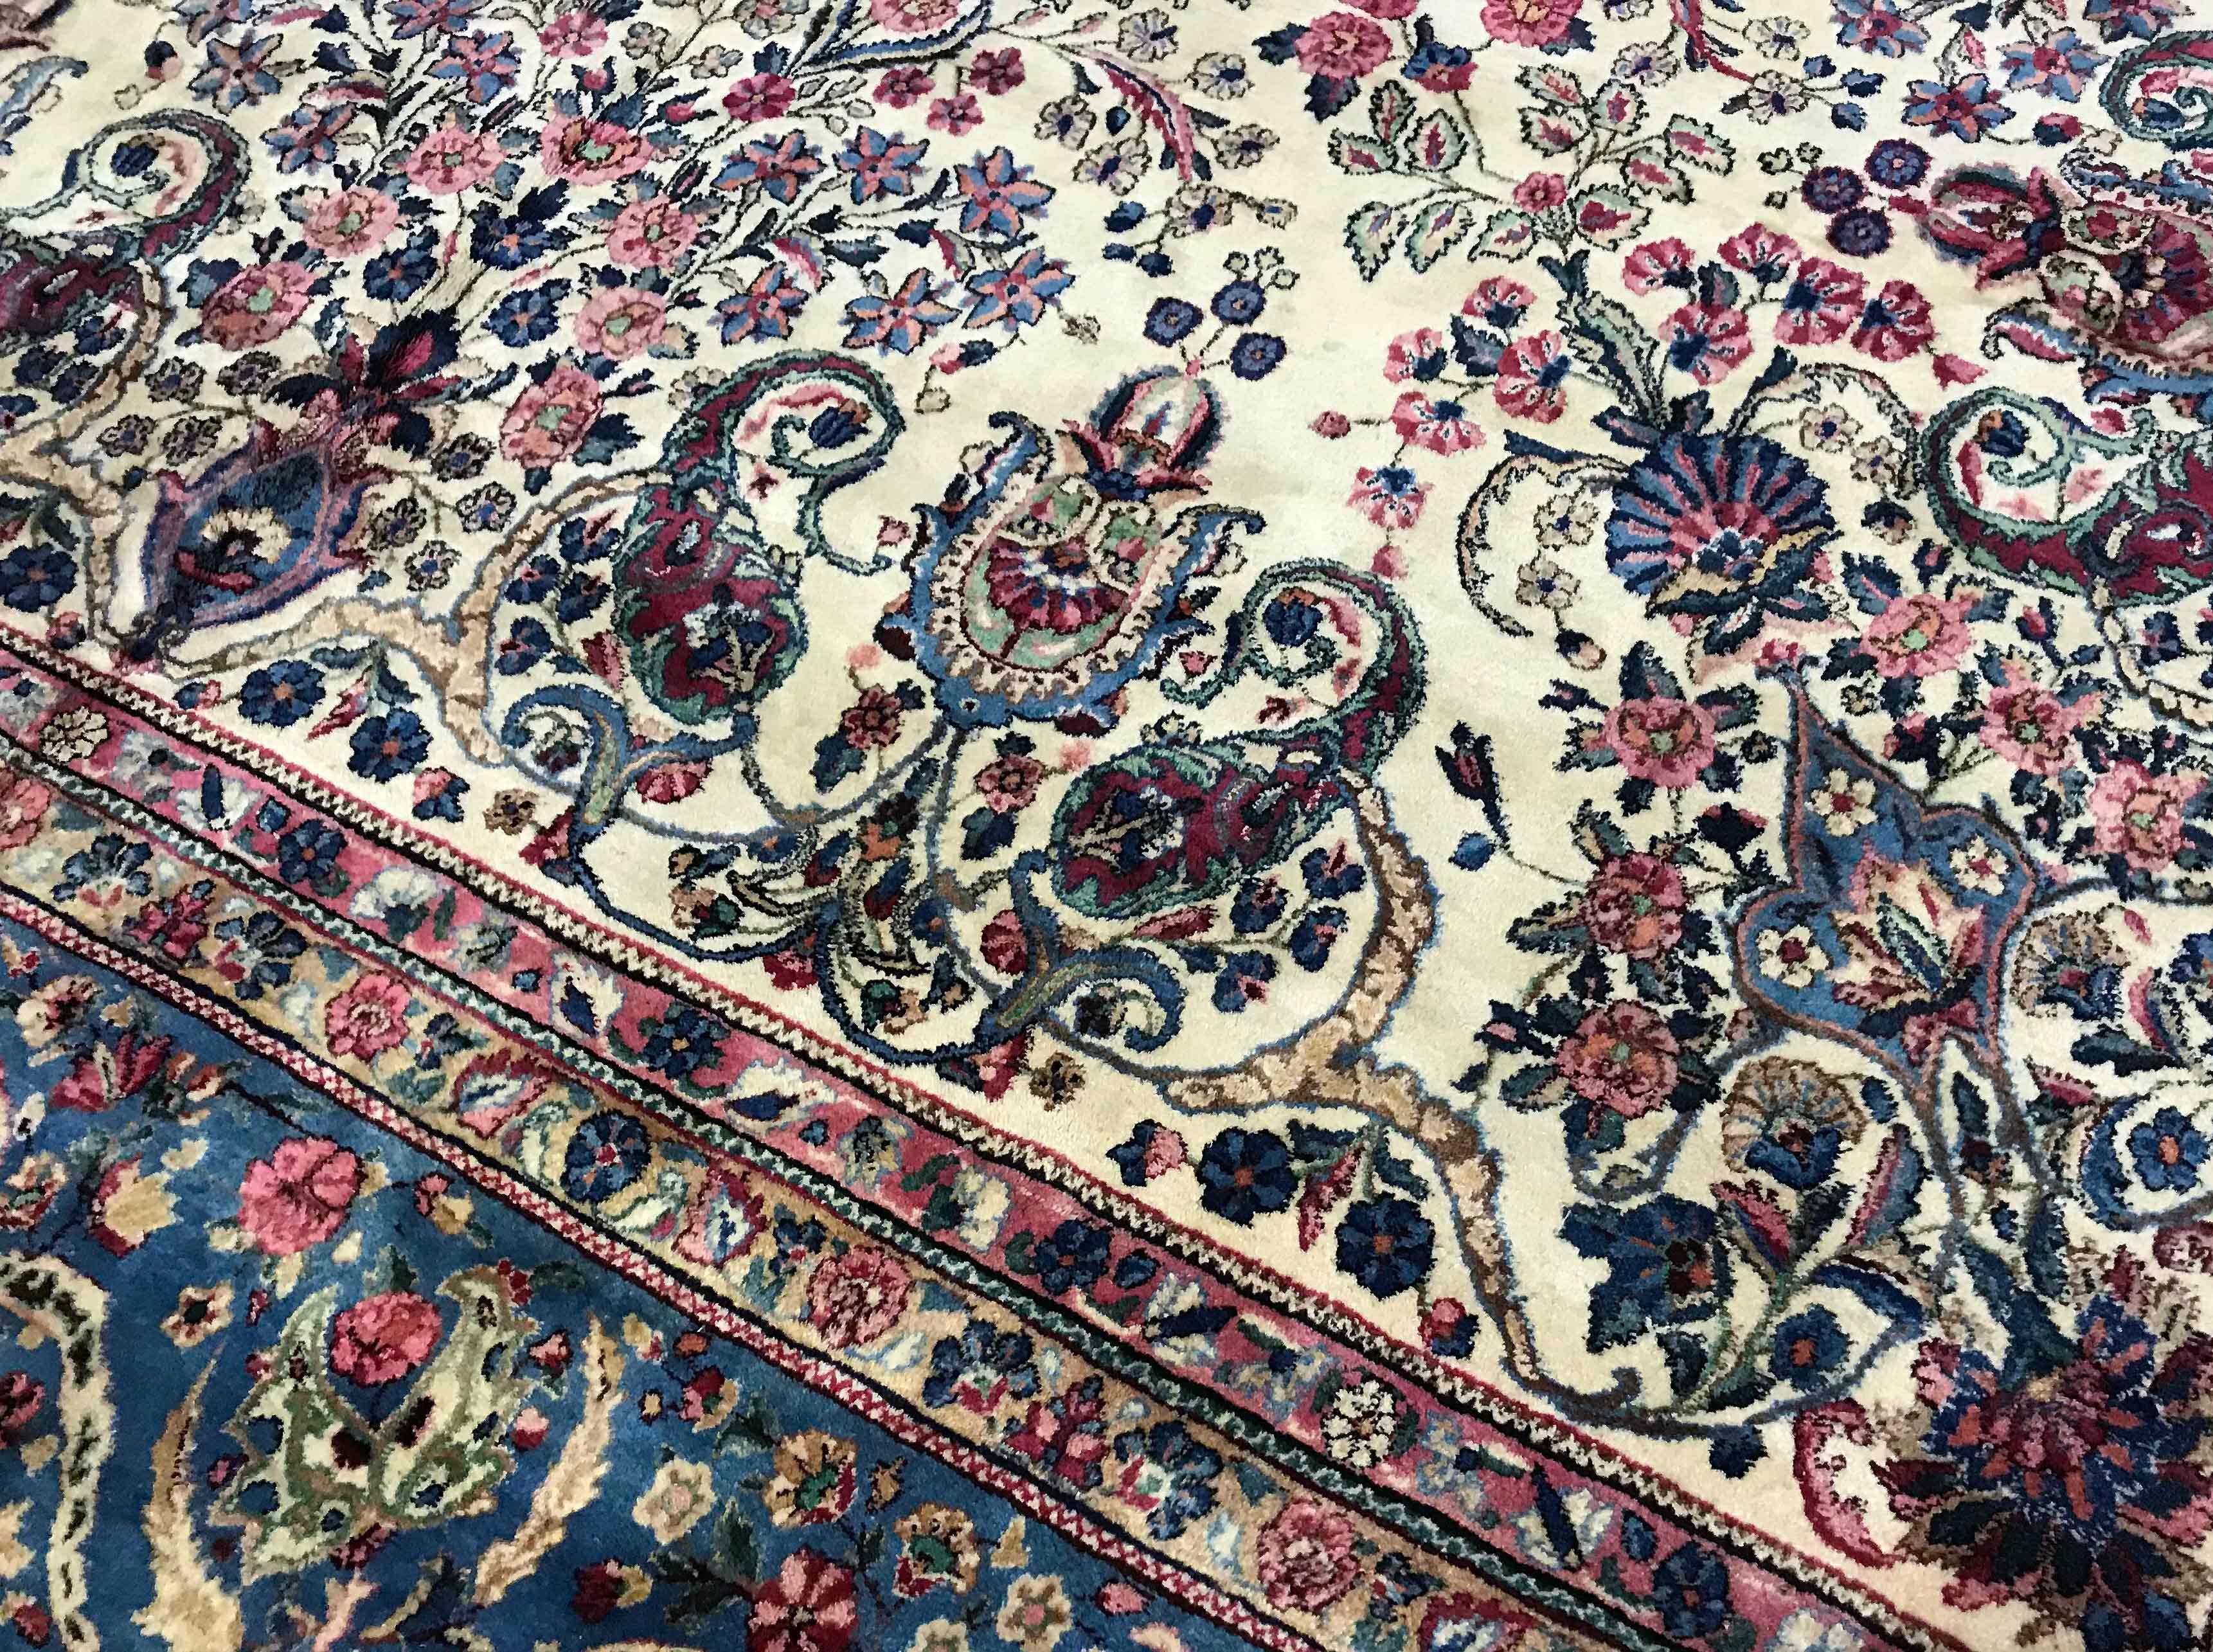 Vintage Persian Kerman rug, circa 1940. The ivory field filled to overflowing with floral designs within a powder blue border that completes this harmonious look.